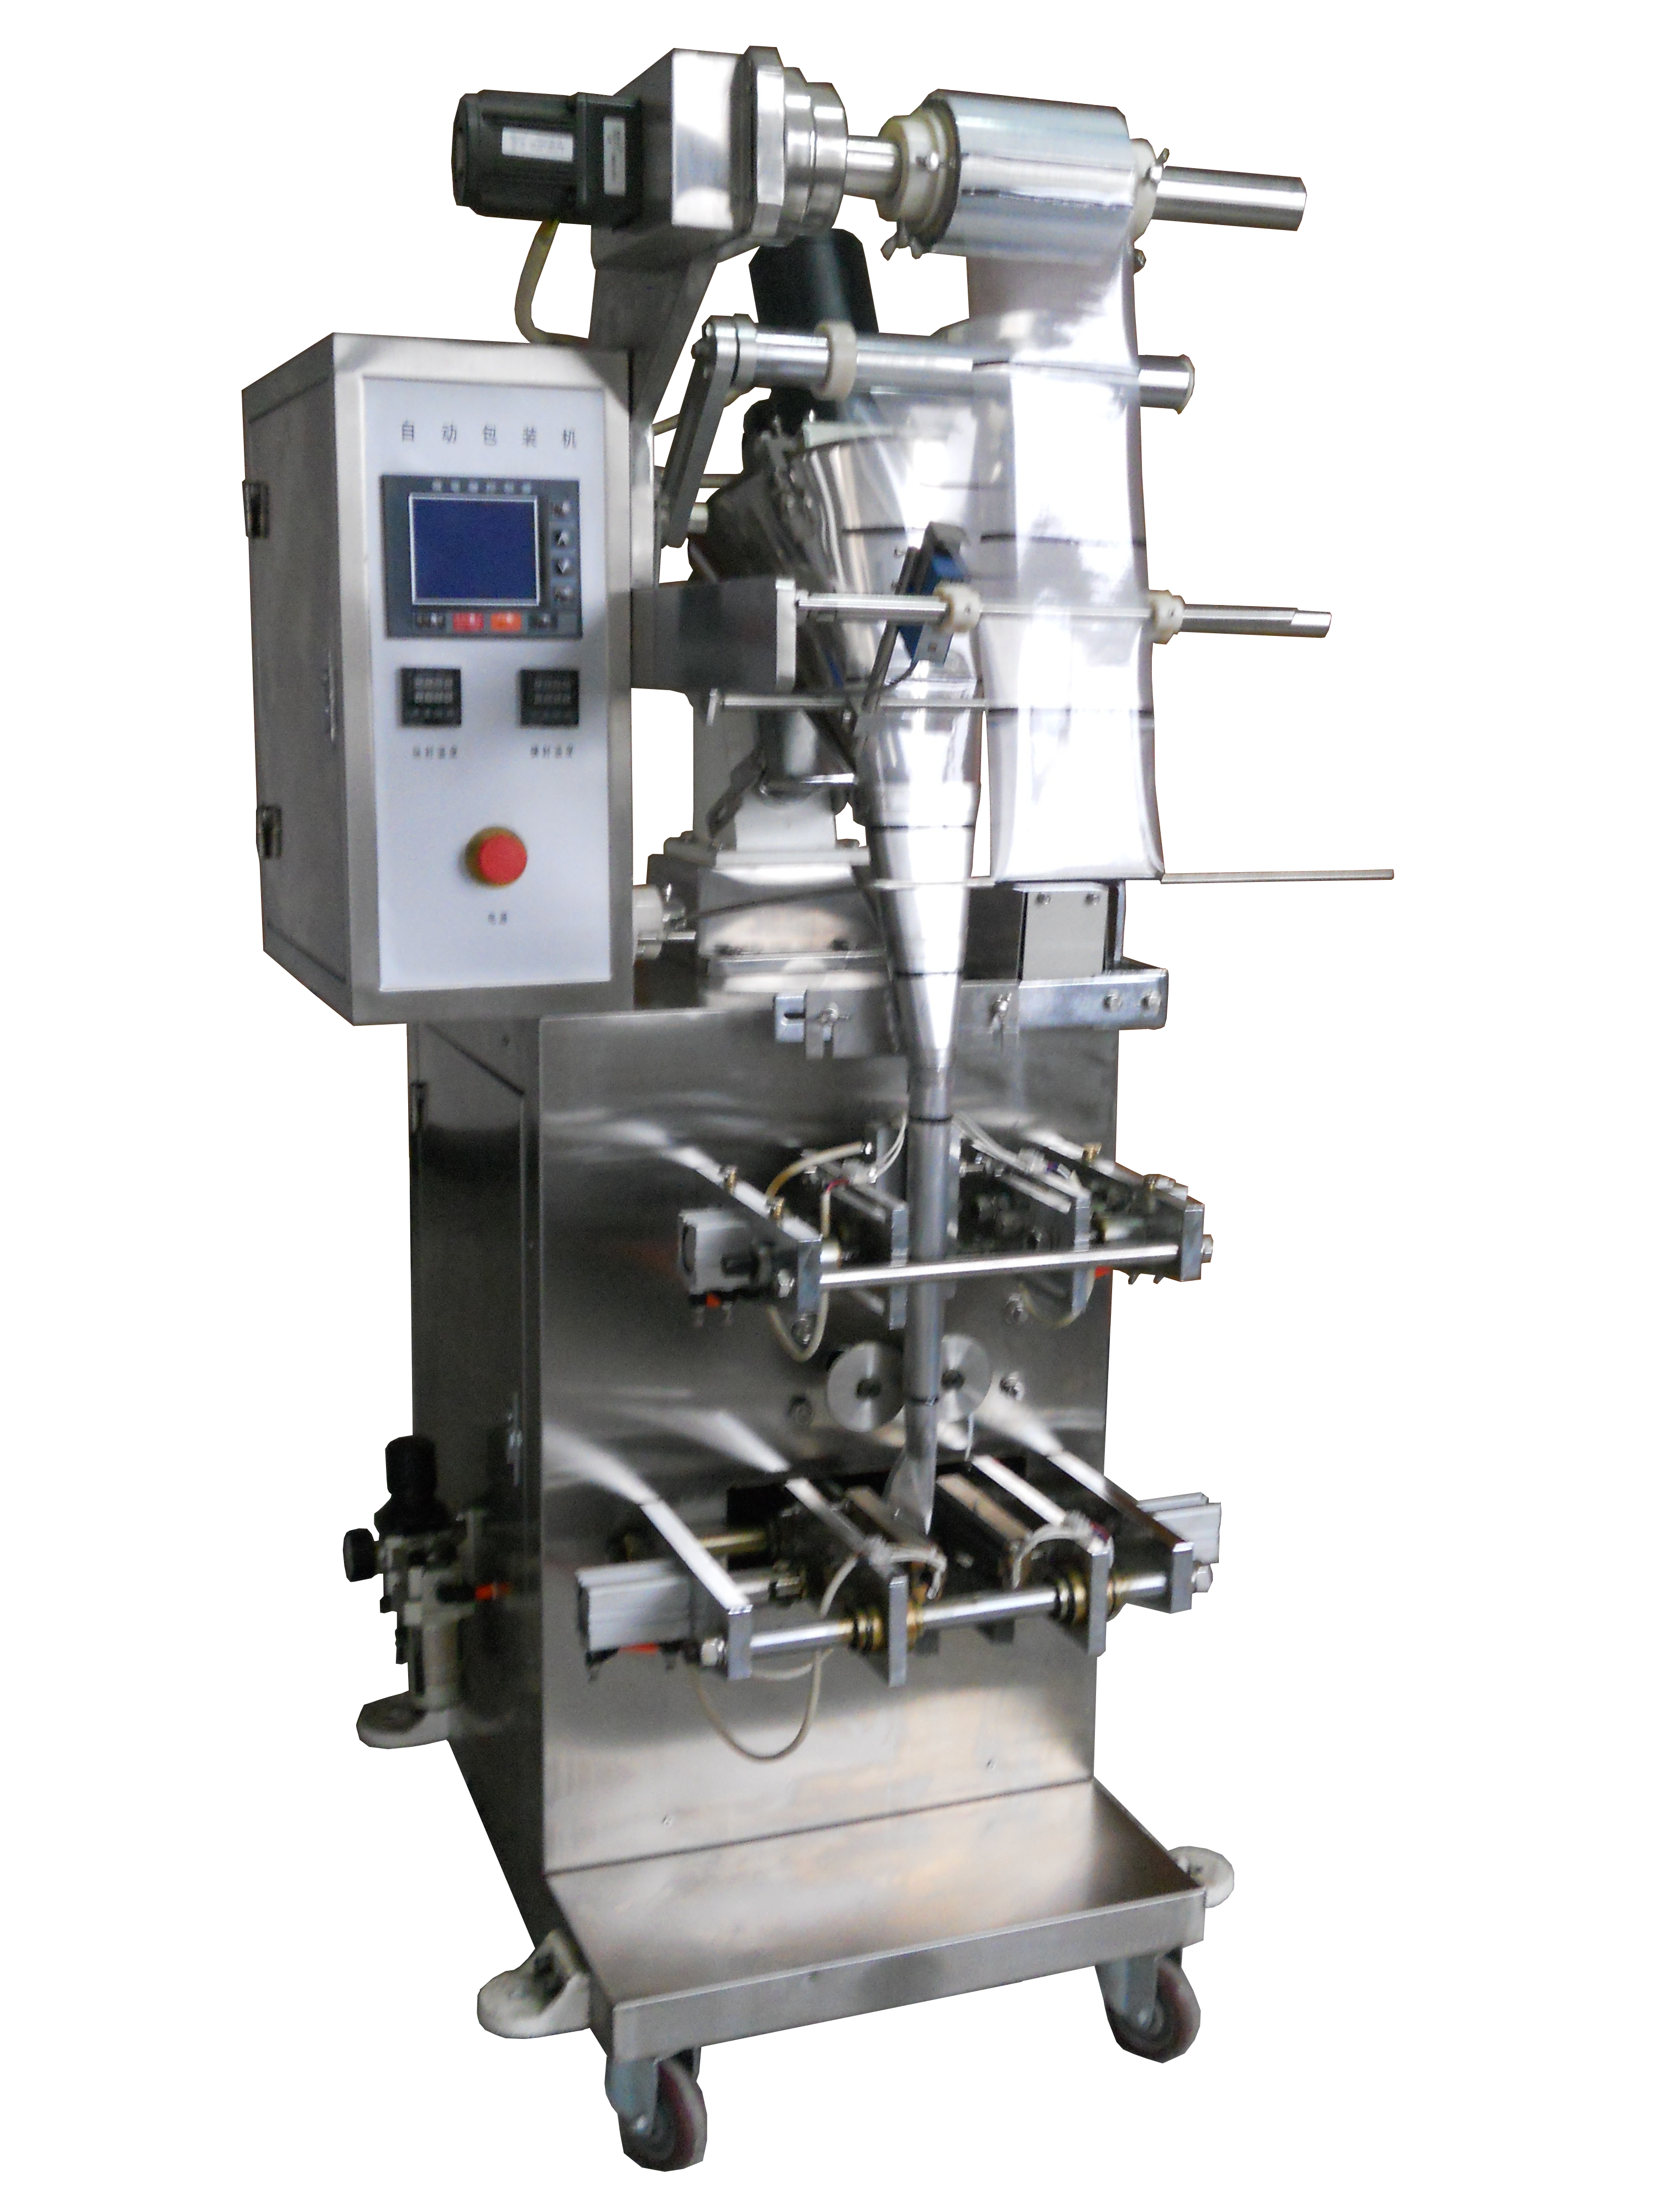 Powder automatic packaging machine: improving production efficiency and quality